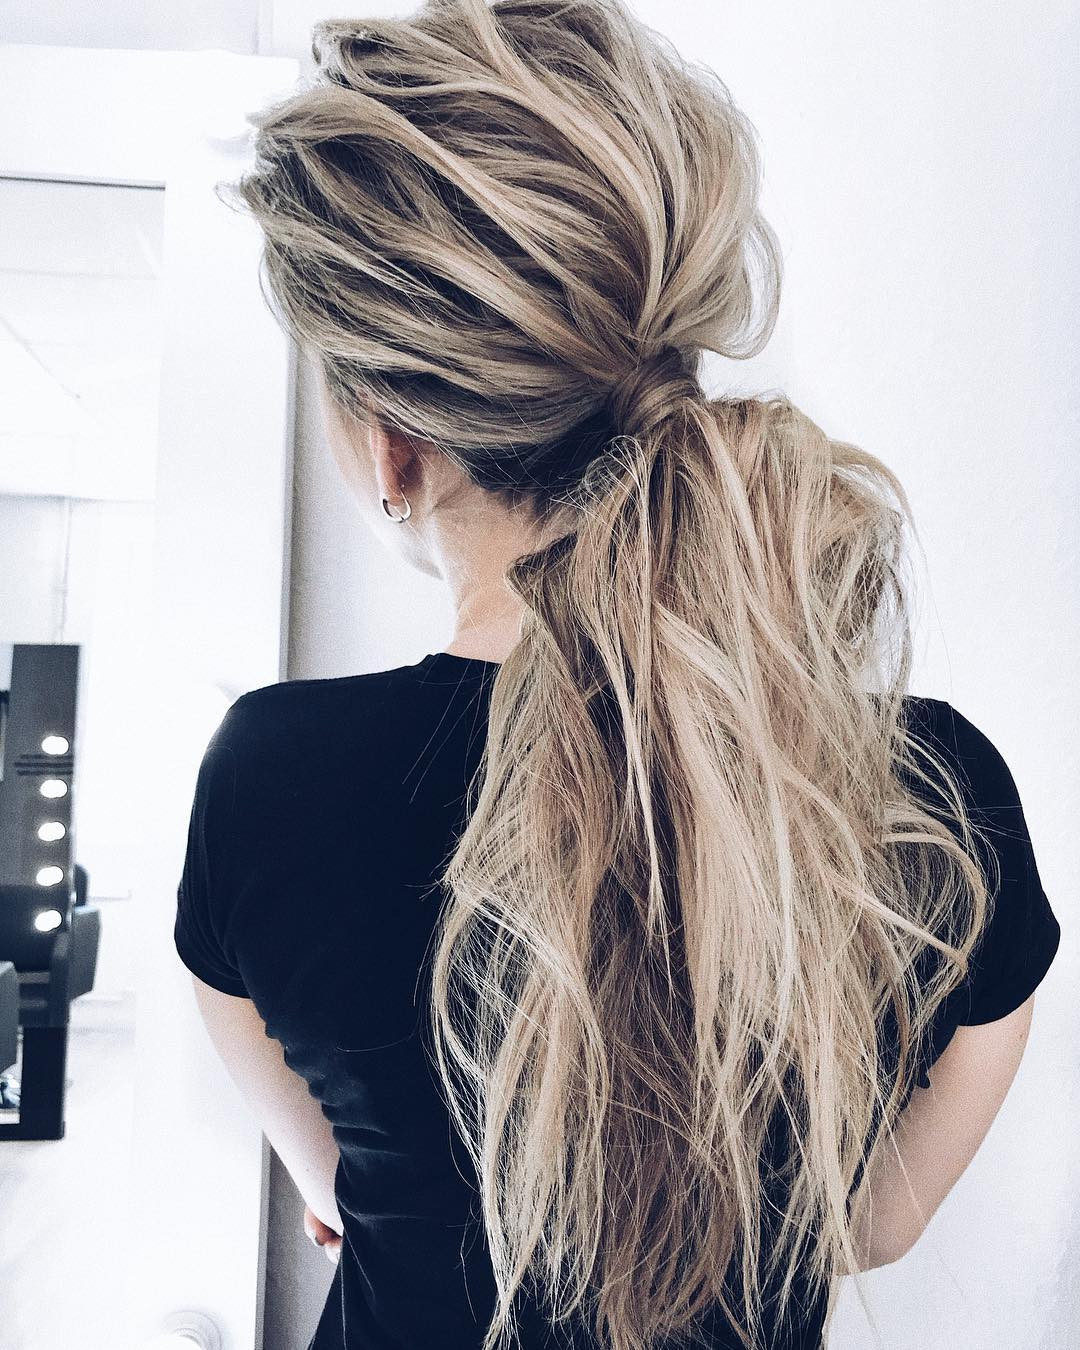 Cool Long Hairstyles
 10 Creative Ponytail Hairstyles for Long Hair Summer